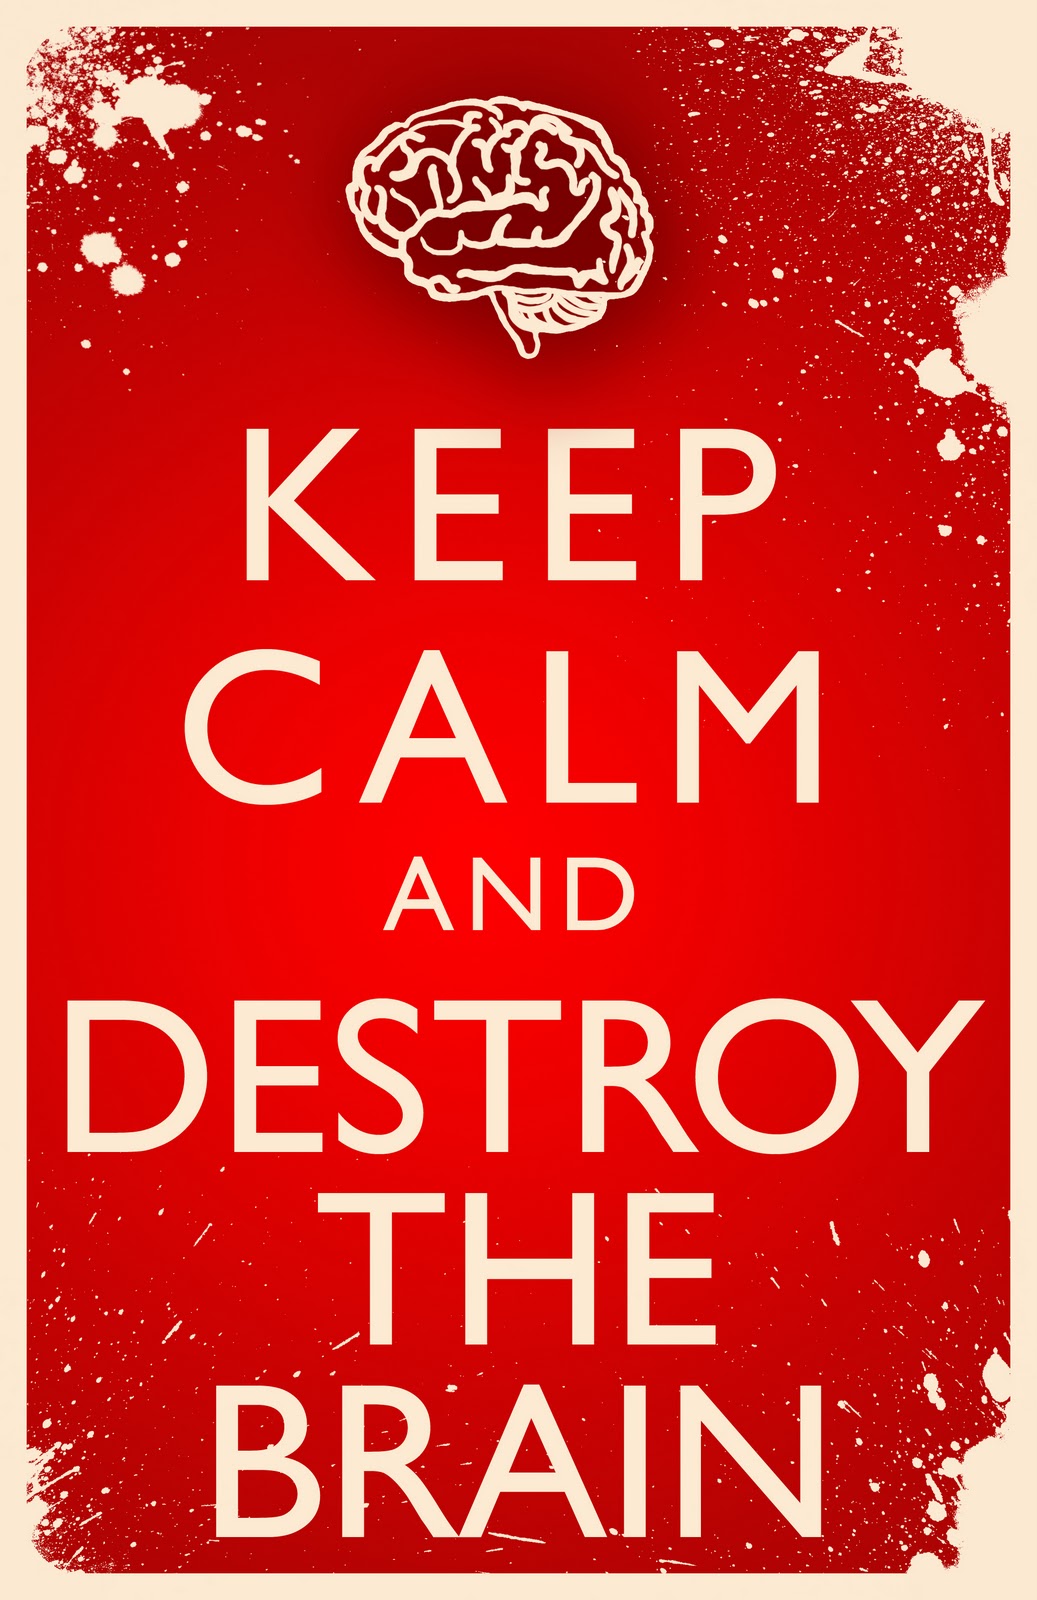 Keep Calm iPhone Wallpaper - iPhone Wallpapers